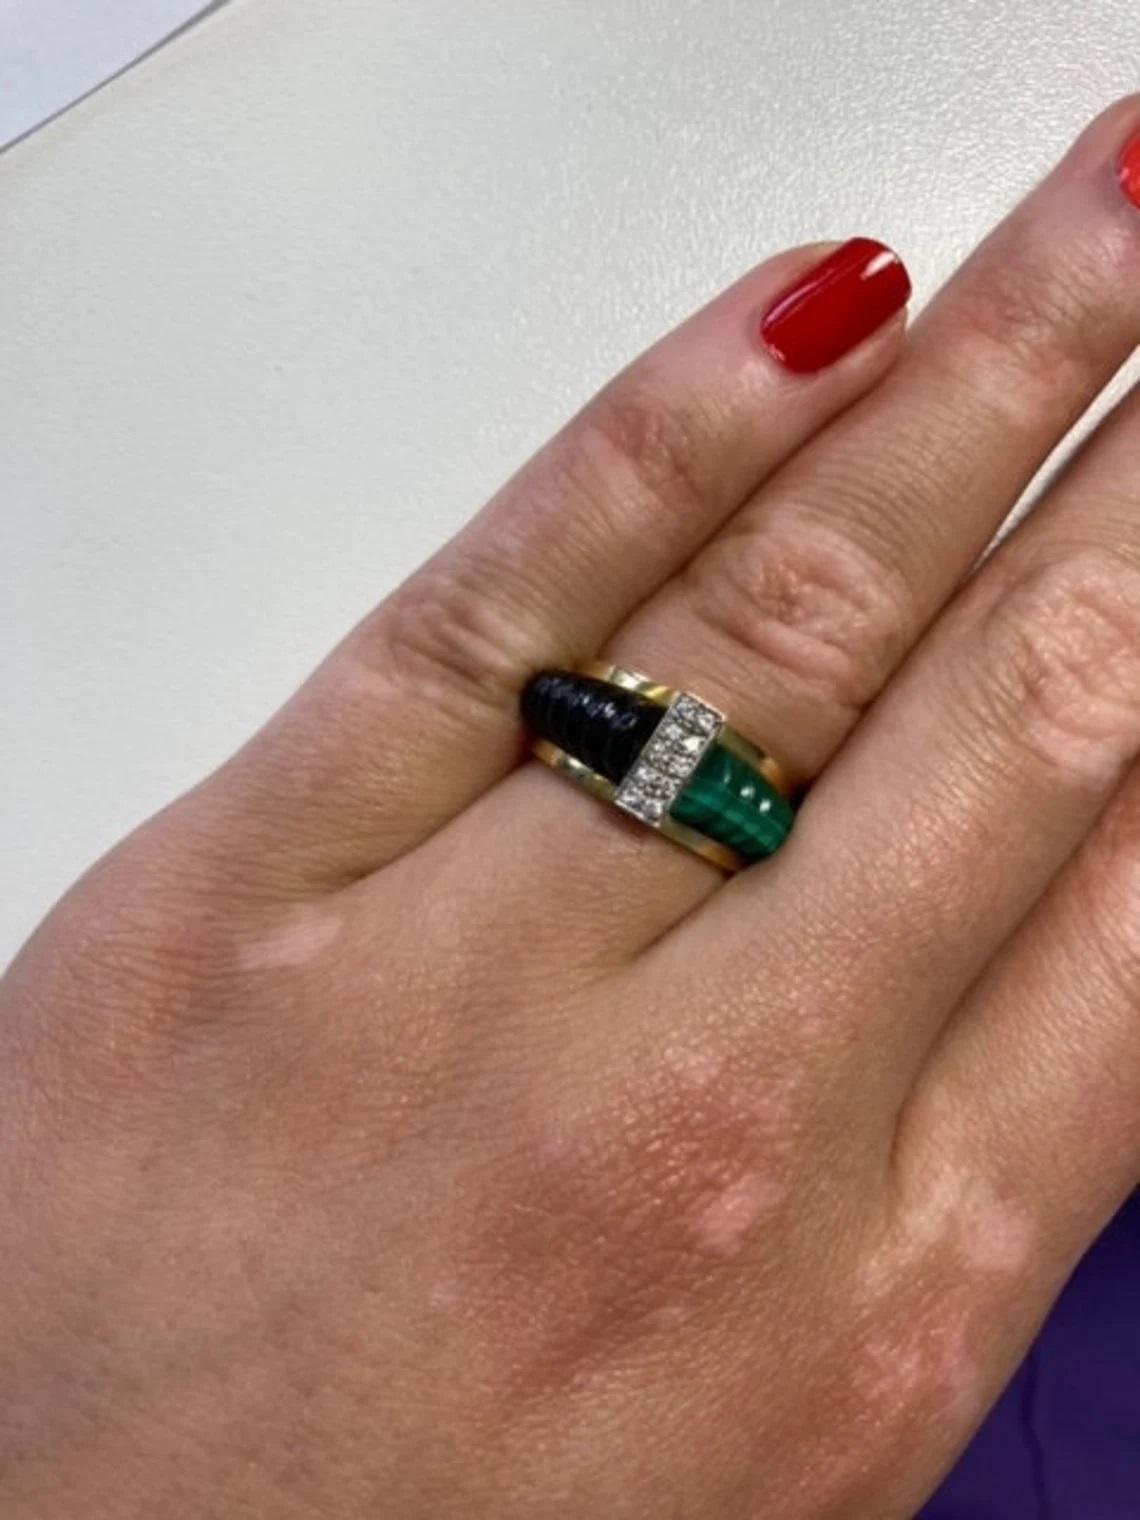 Vintage 18k Gold Malachite and Onyx Ring with Diamonds, One-of-a-kind

This vintage ring from the 1980s is a perfect statement piece. It has an onyx and beautiful leaf-green malachite stone set in 18k yellow gold with white diamond detail. Made to